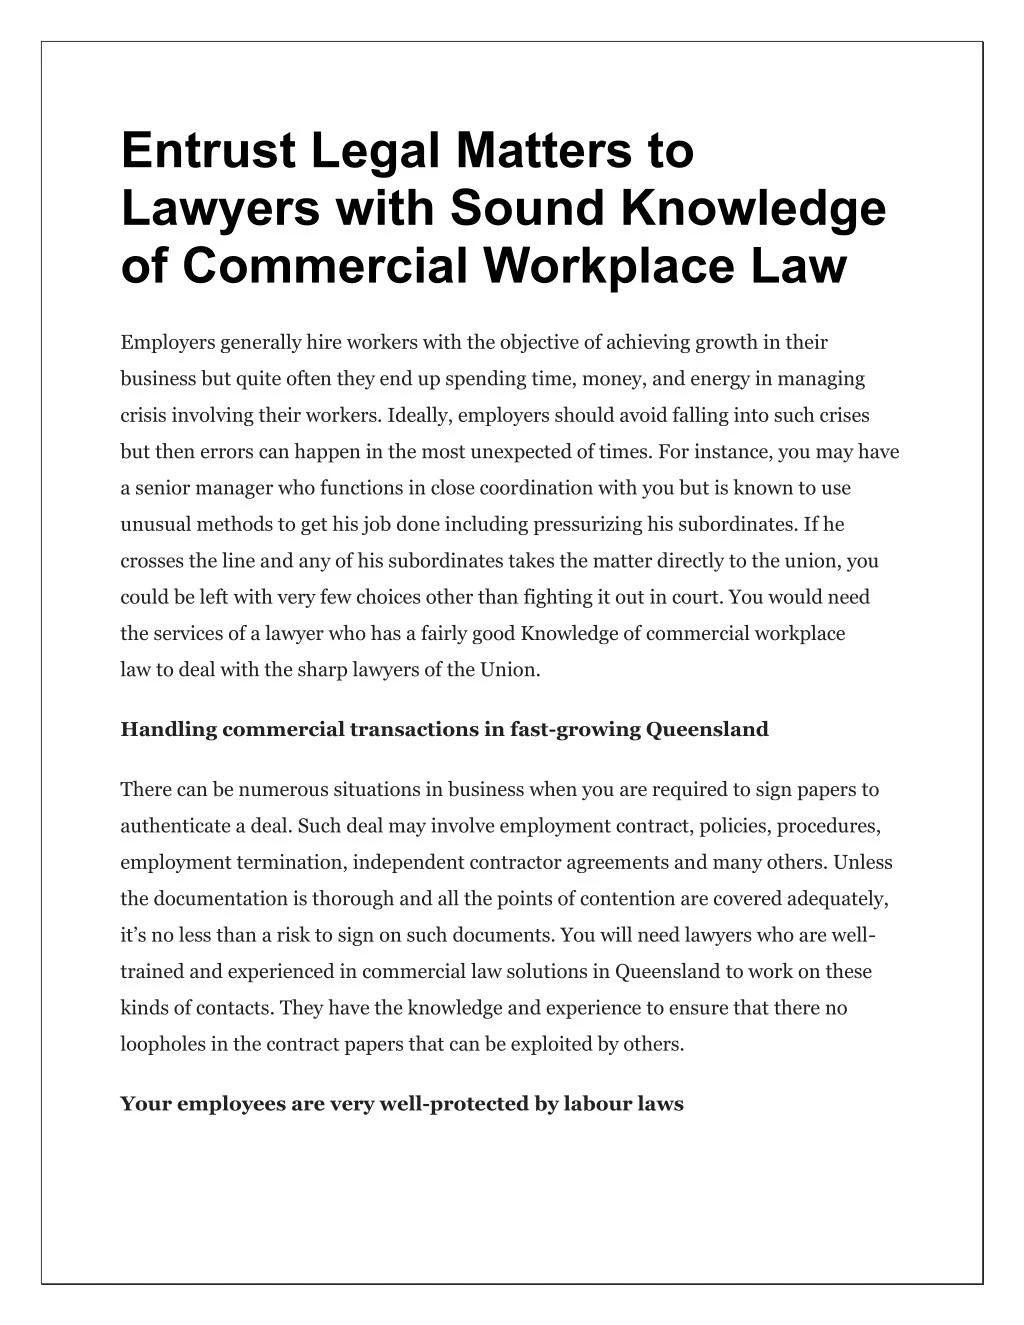 entrust legal matters to lawyers with sound